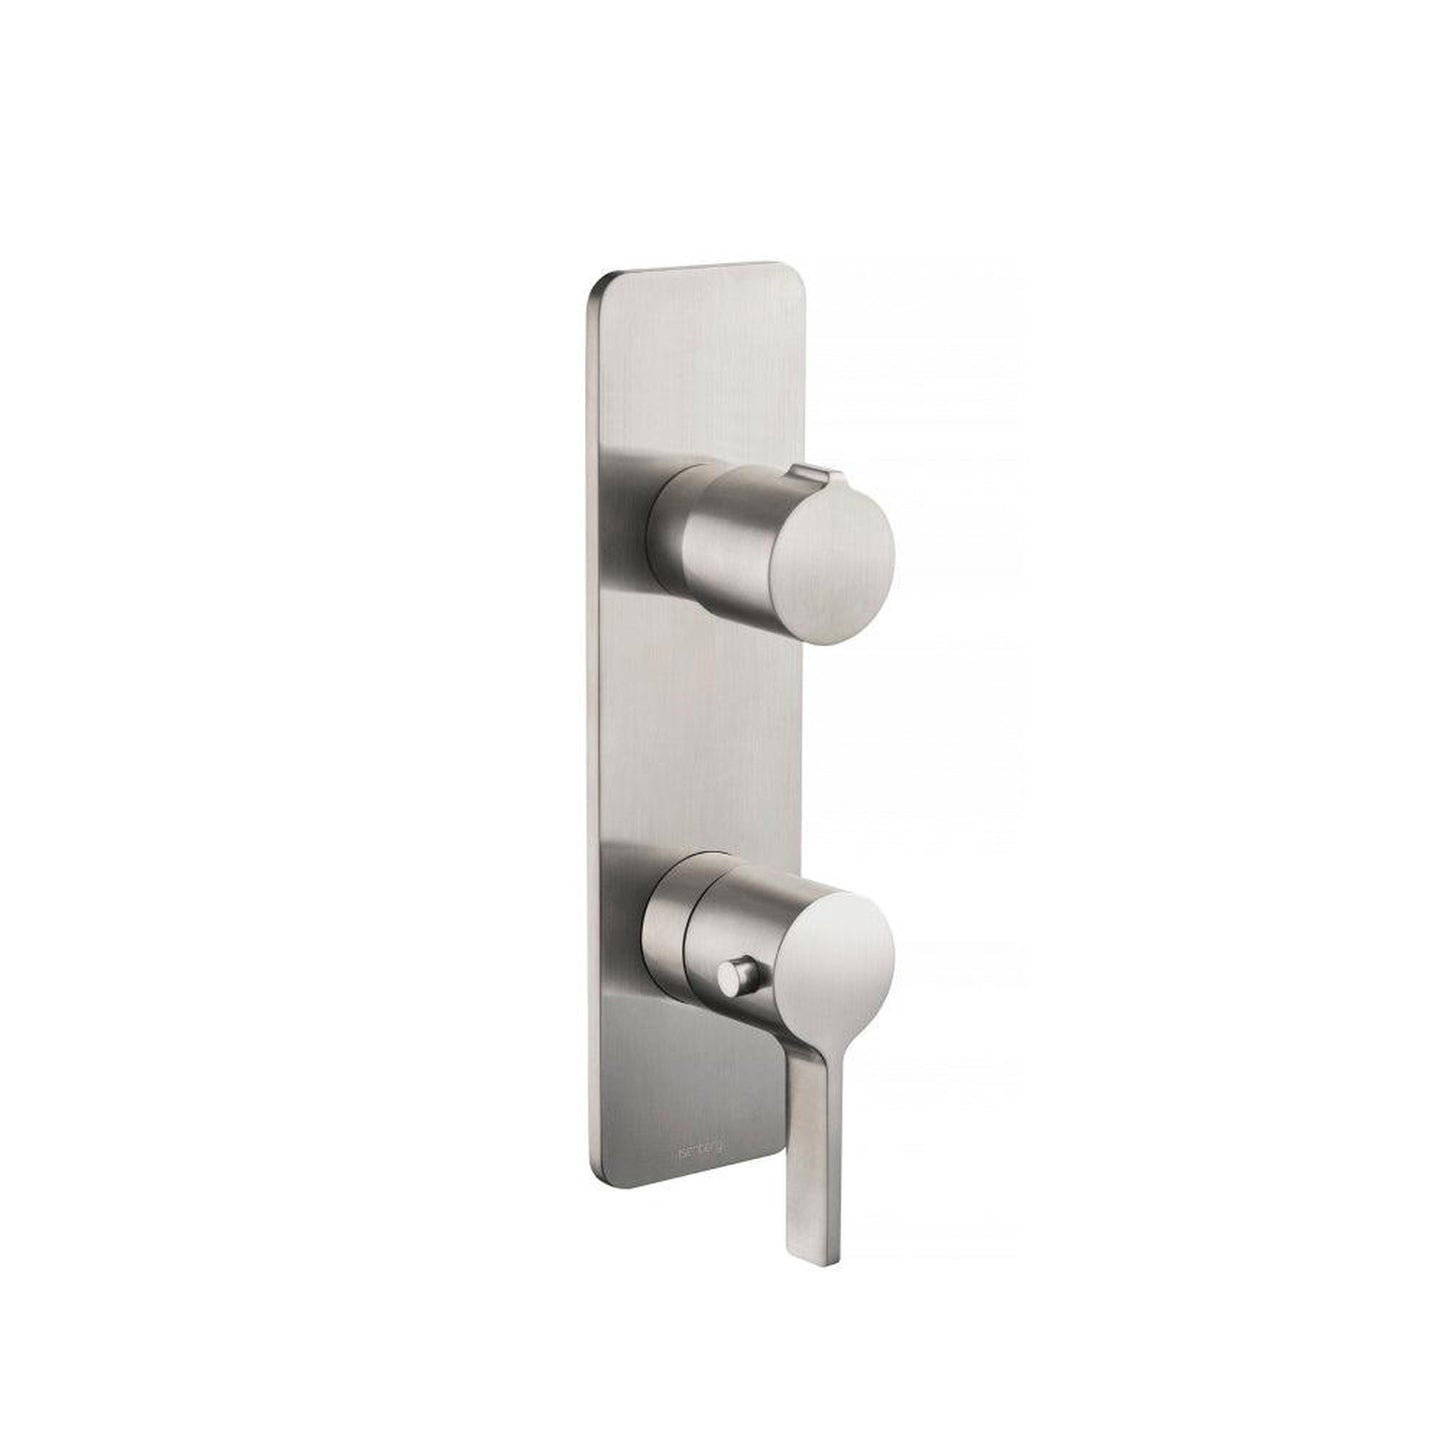 Isenberg Serie 260 3/4" Single Output Horizontal Thermostatic Shower Valve and Trim in Brushed Nickel (260.2720BN)